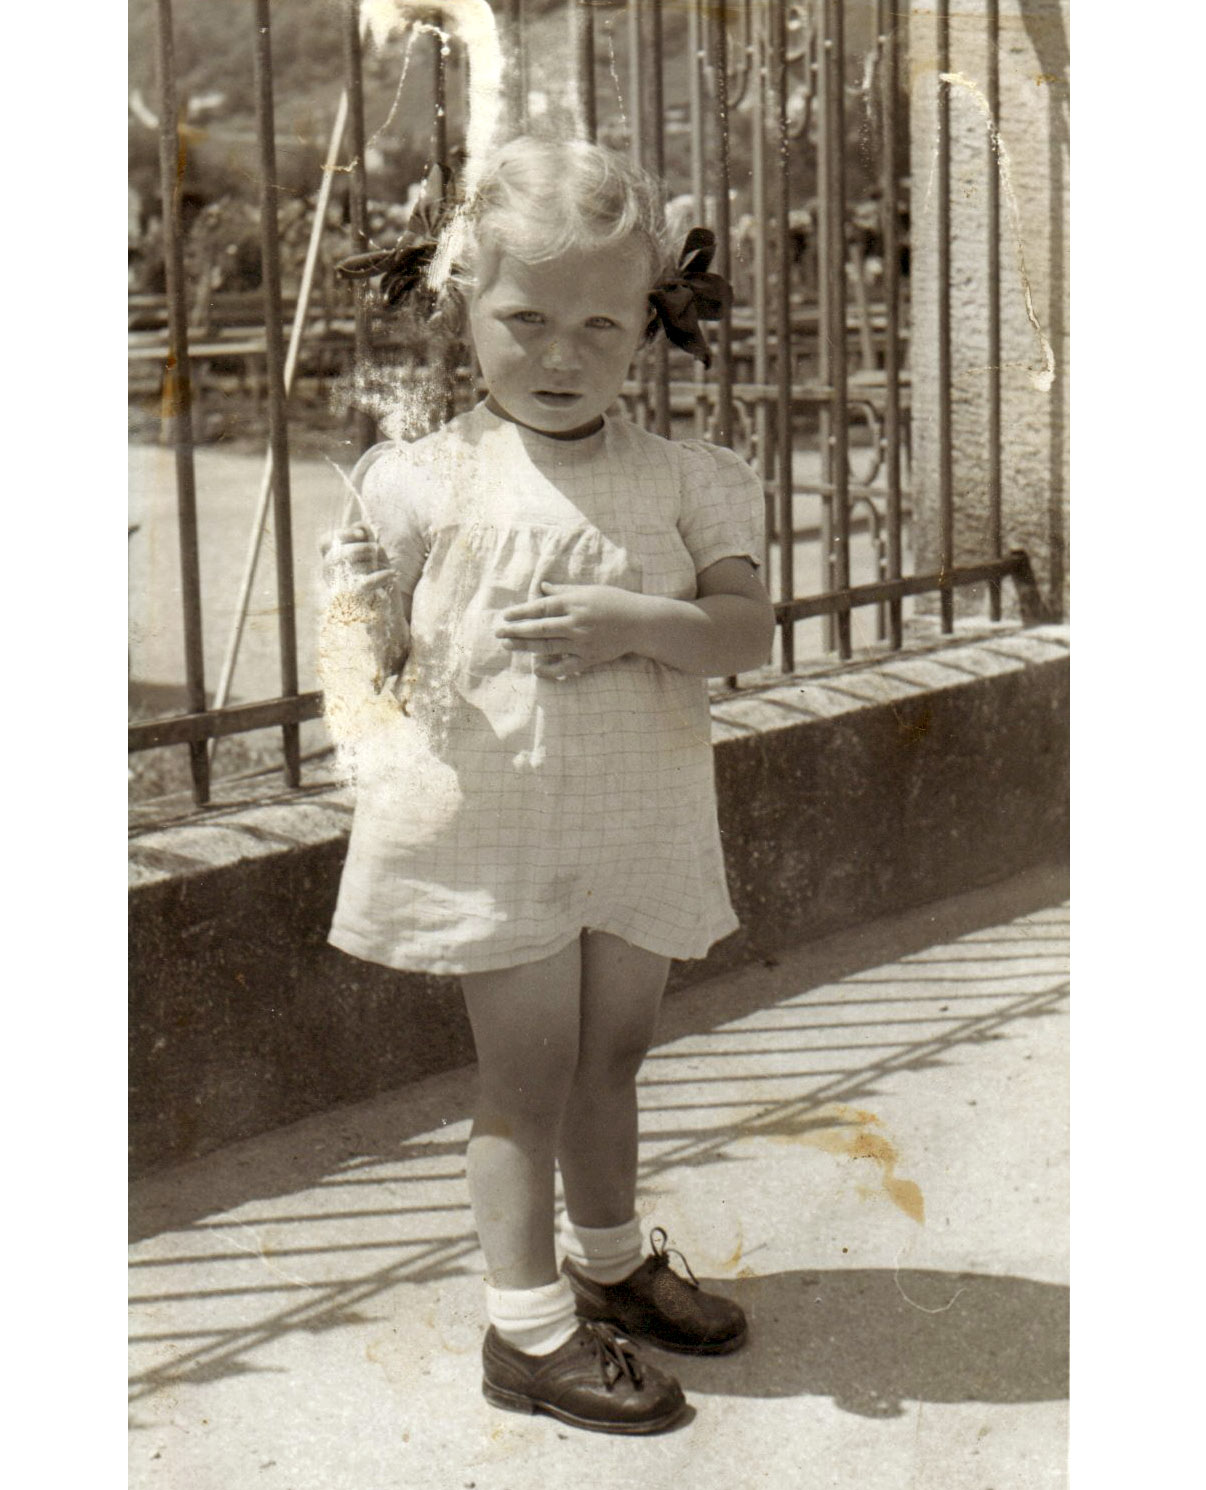 My godmother Katharina in 1947.